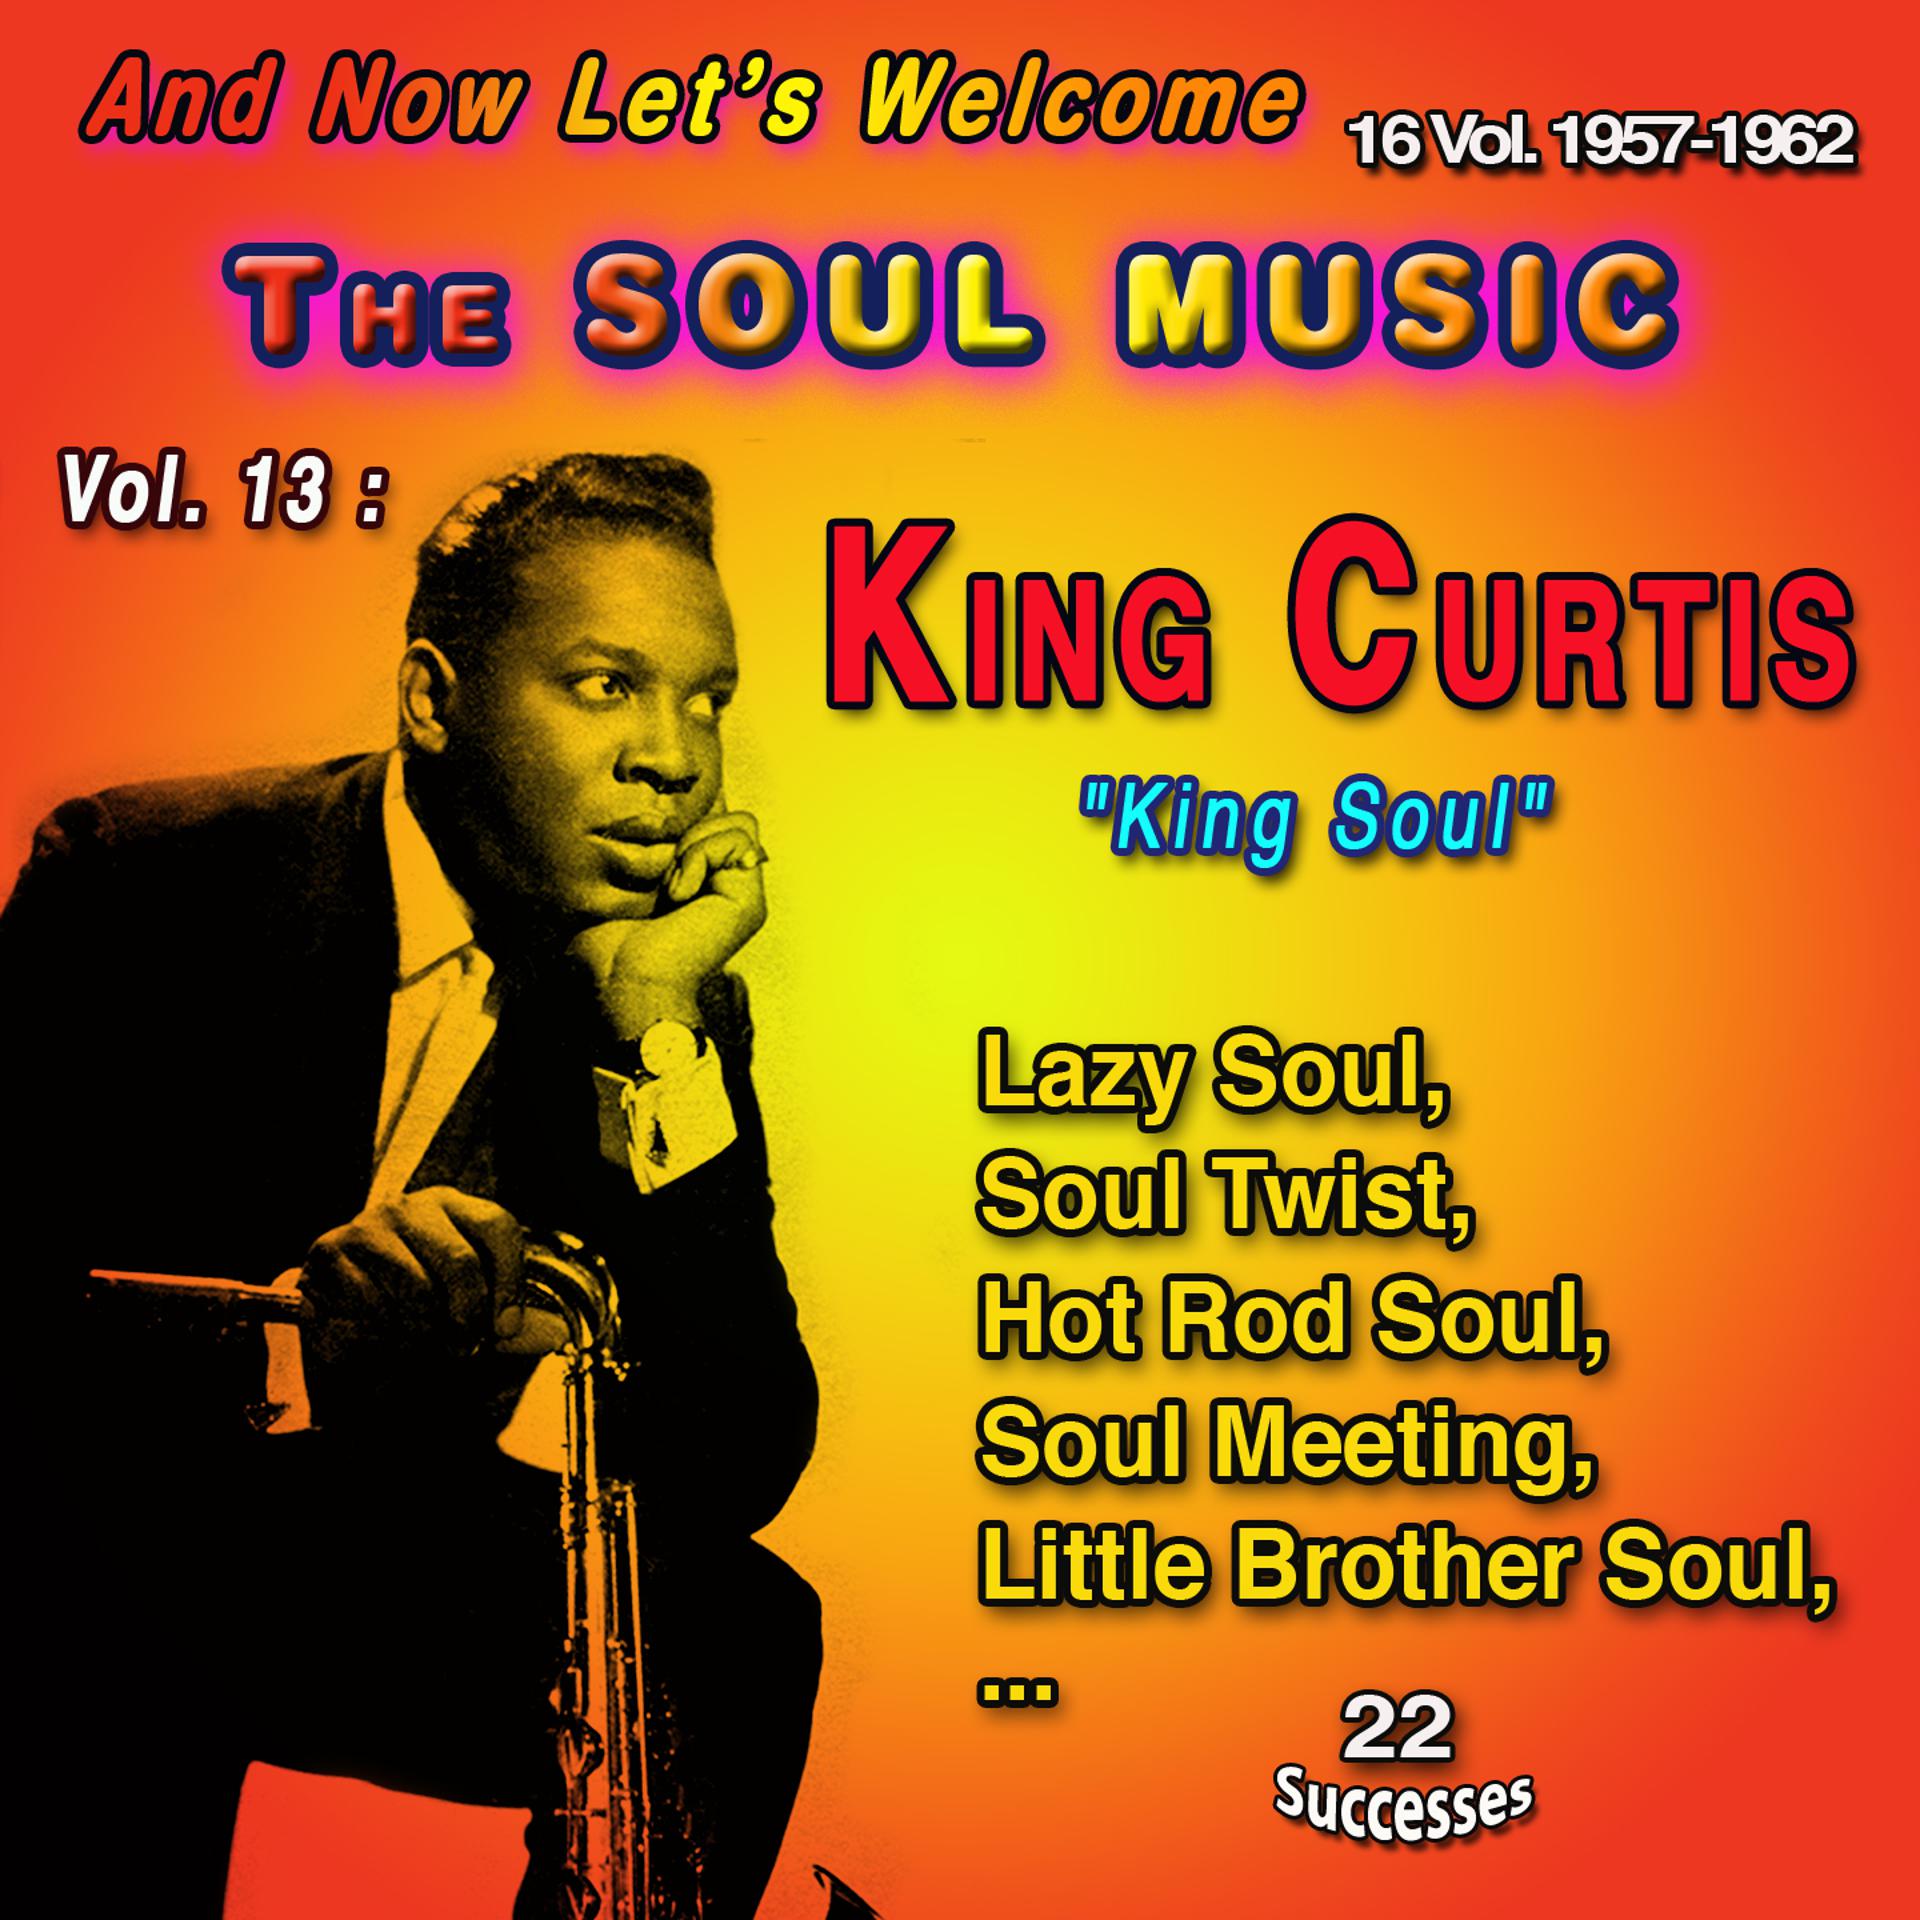 Постер альбома And Now Let's Welcome The Soul Music 16 Vol. : 1957-1962 Vol. 13 : King Curtis "The King of Soul"